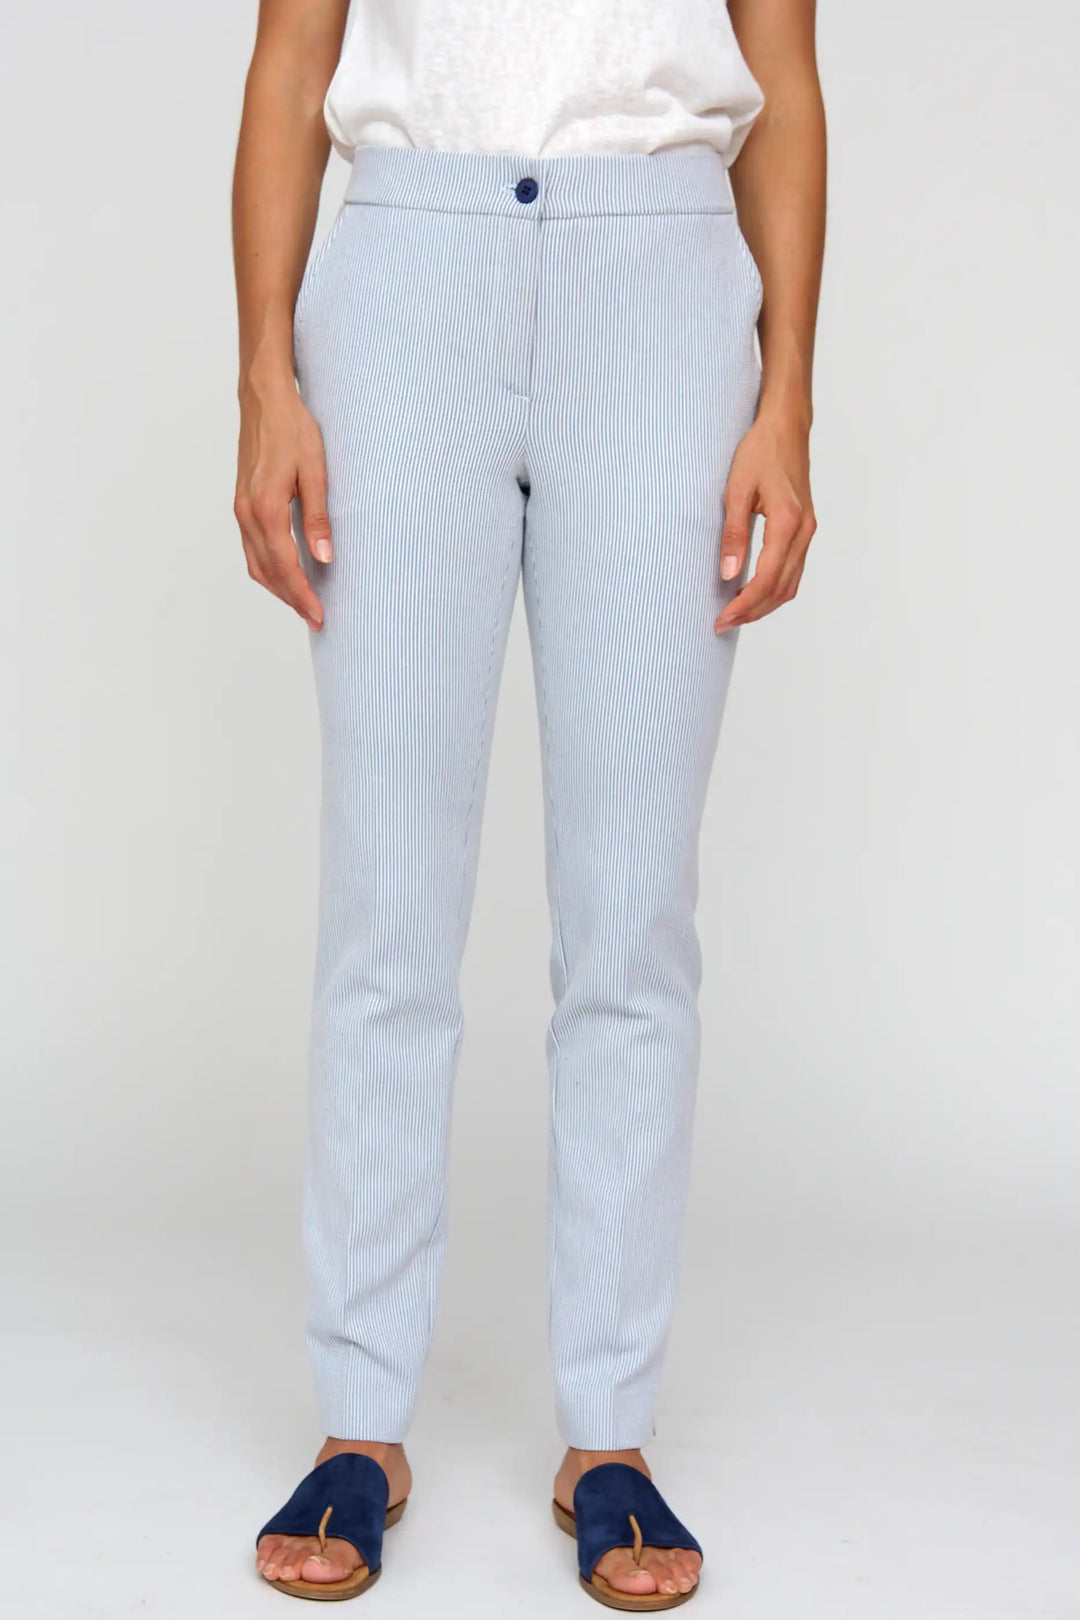 Model wearing 'Cesta24' light blue pinstripe trousers with a straight-leg fit and button closure, paired with a white top and navy blue sandals.